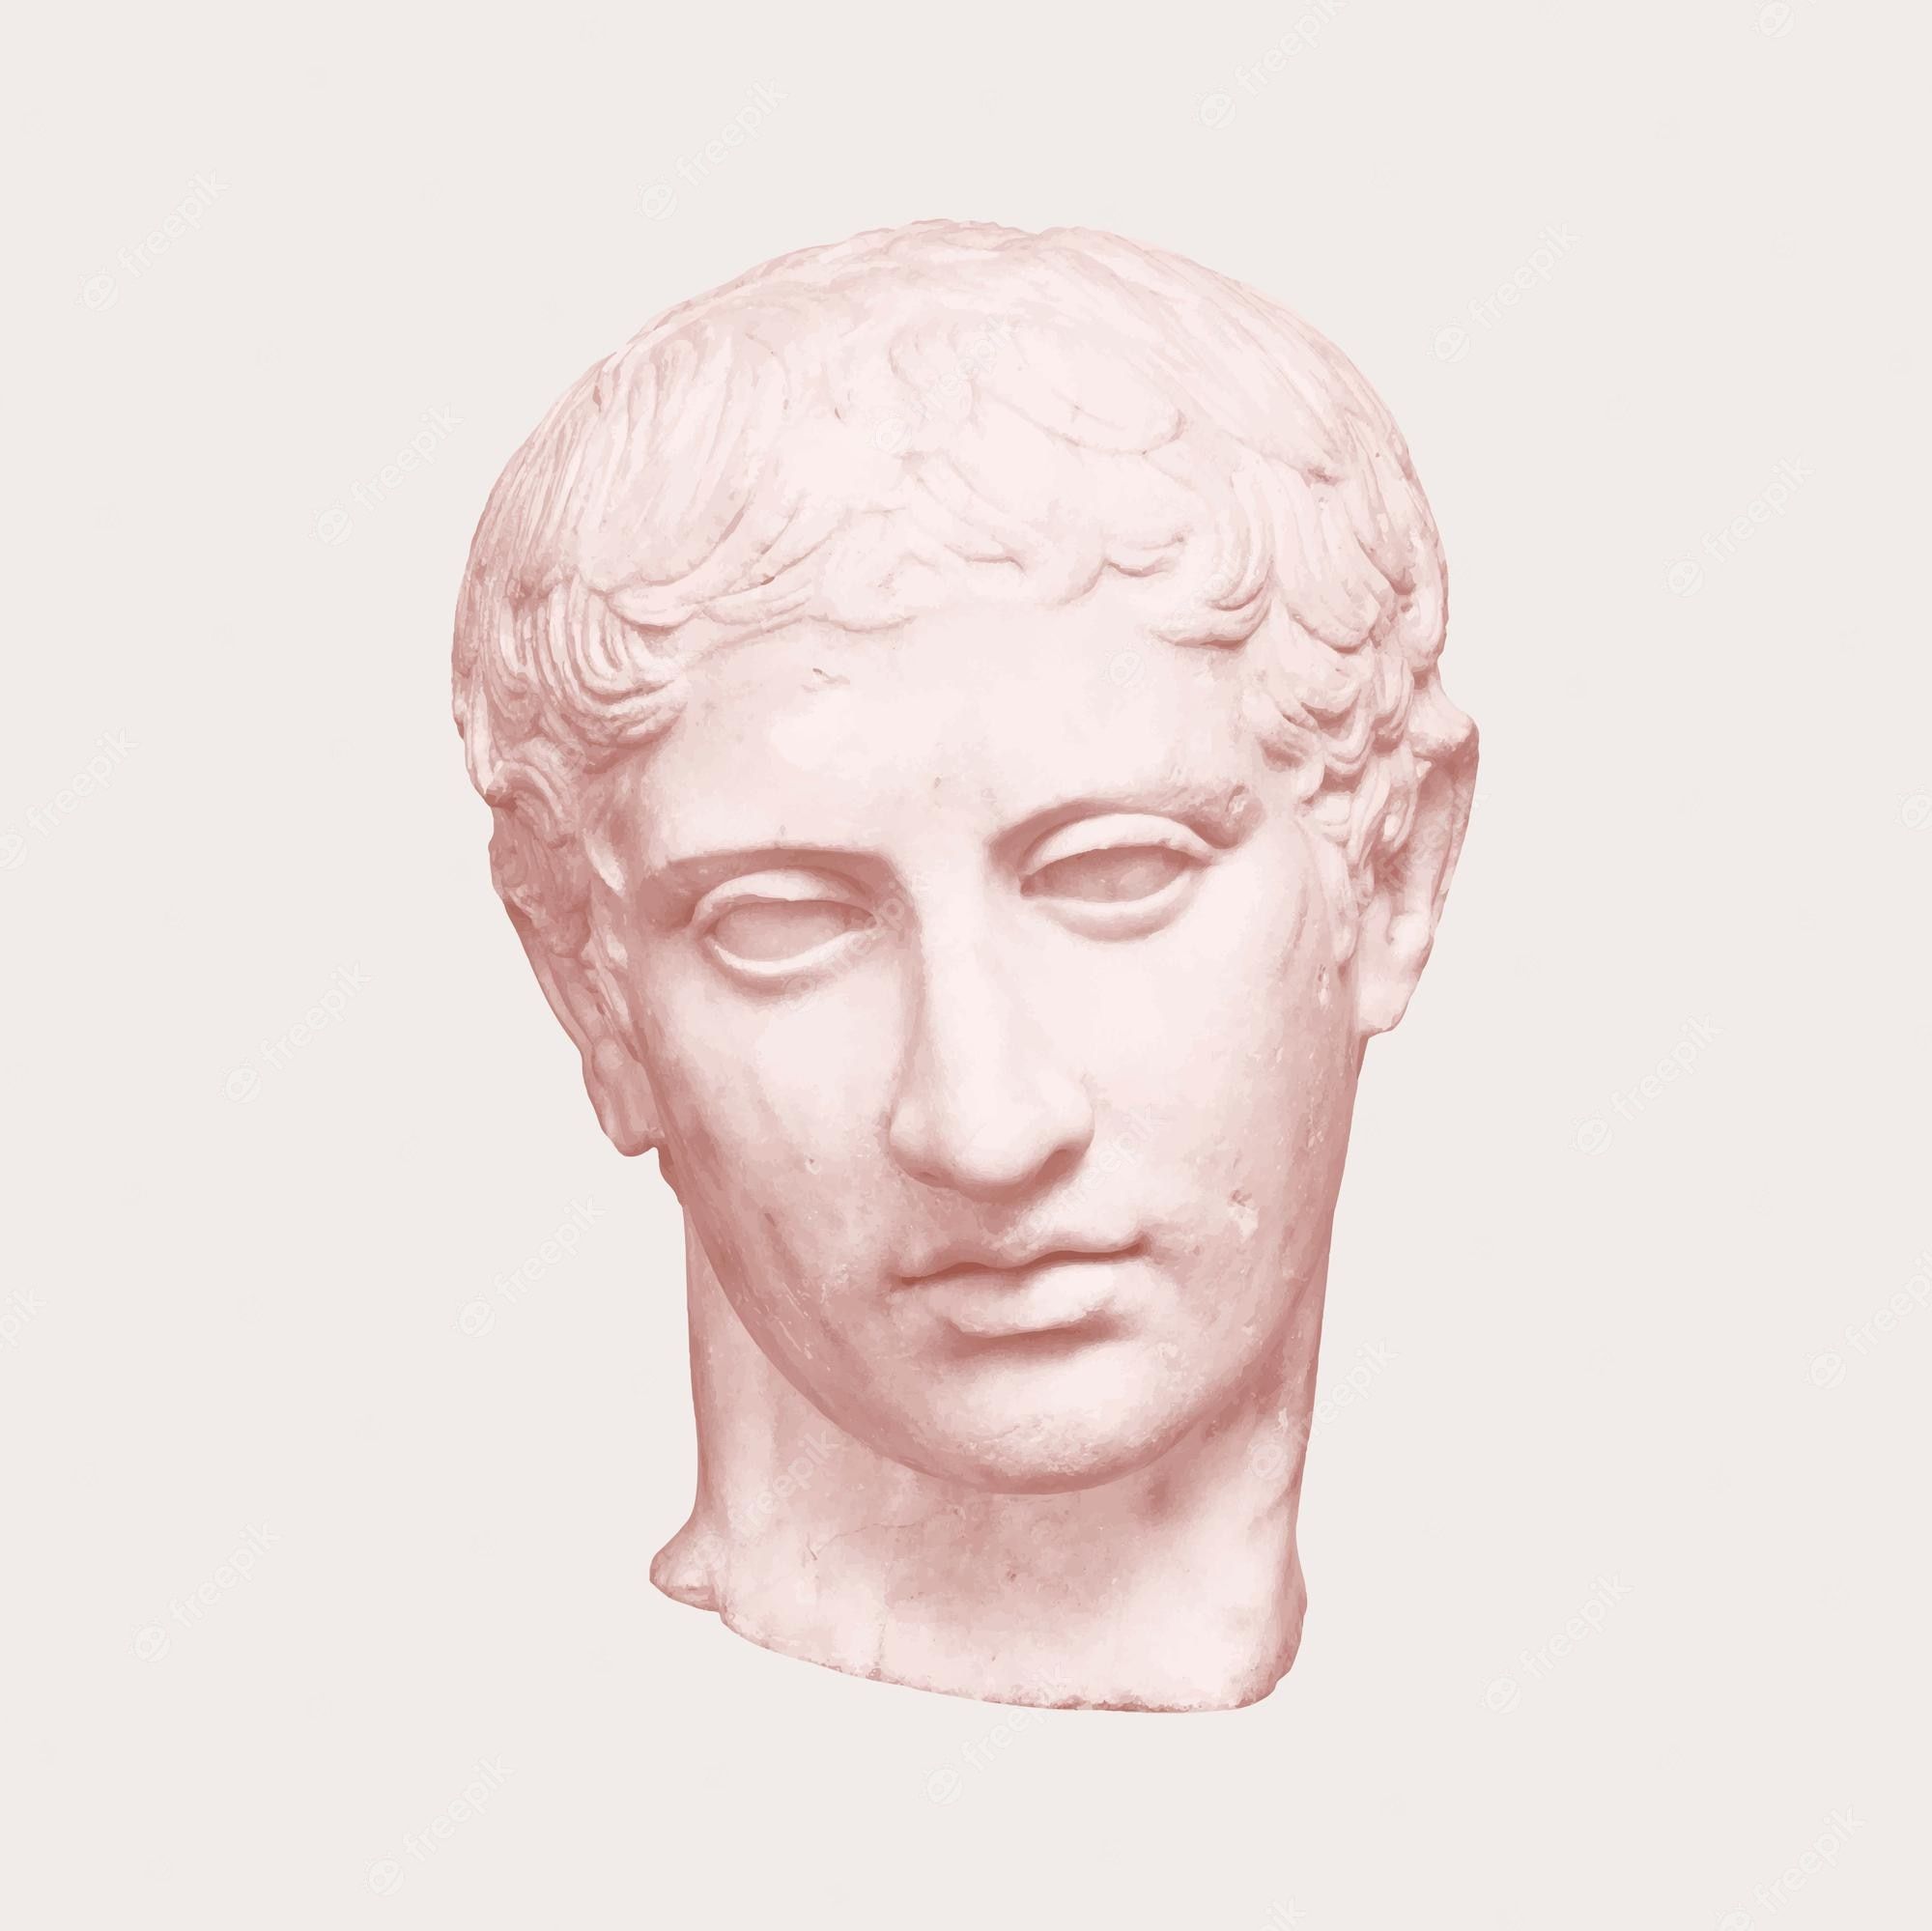 A 3D render of a statue of a man's face. - Greek statue